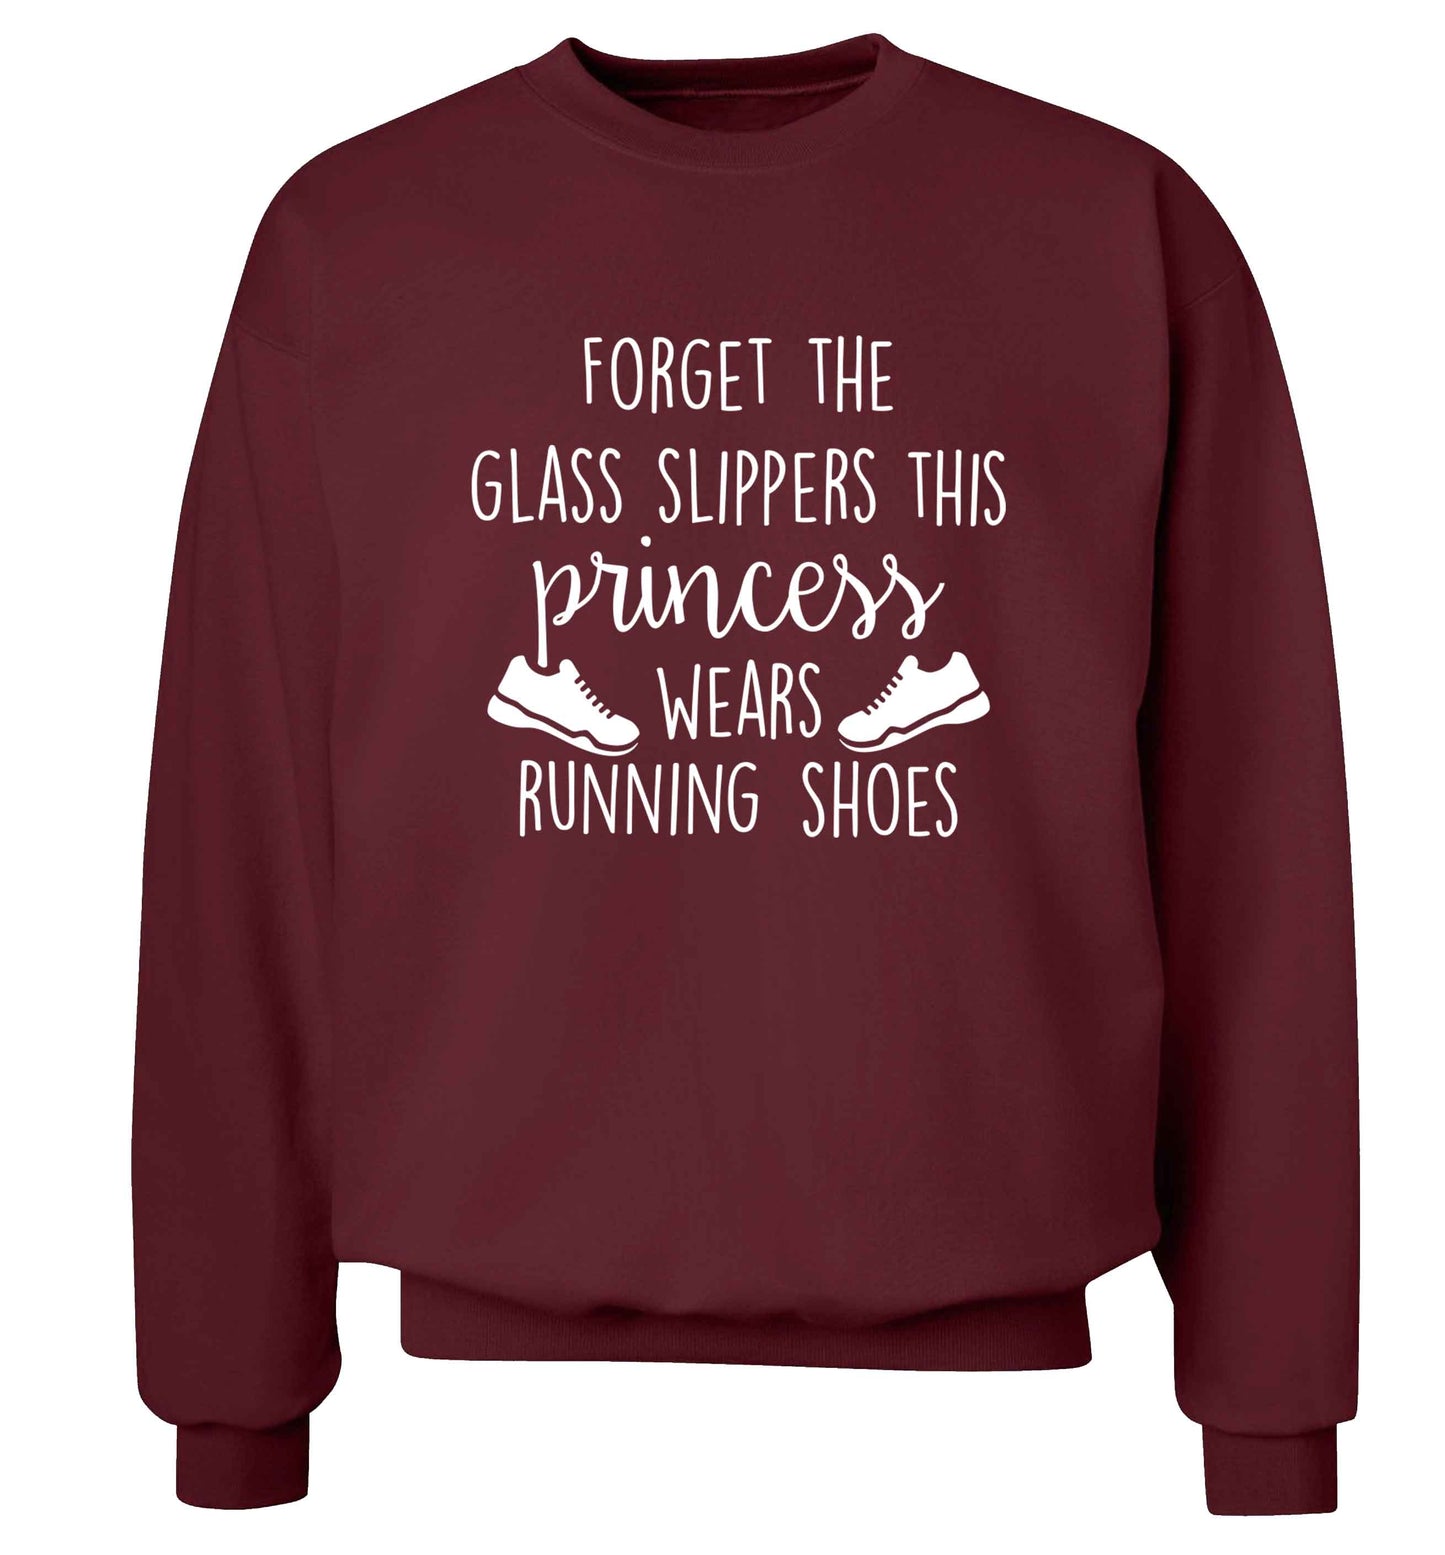 Forget the glass slippers this princess wears running shoes adult's unisex maroon sweater 2XL